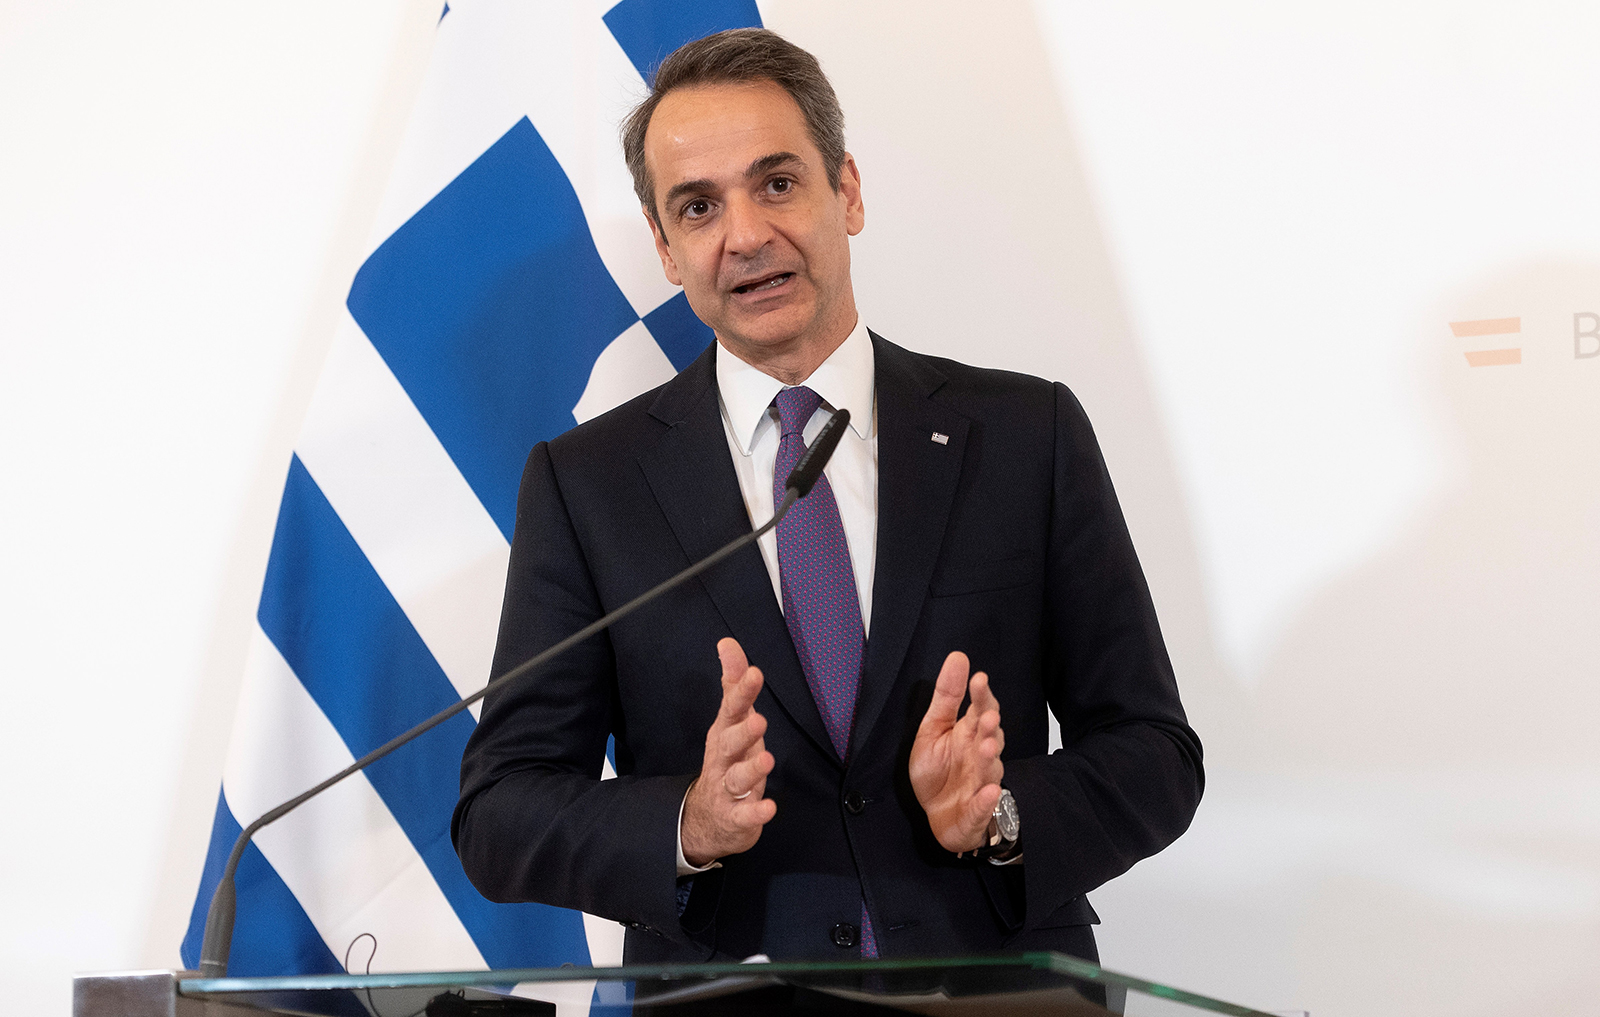 Prime Minister Kyriakos Mitsotakis of Greece speaks during a press conference in Vienna, Austria on March 10.